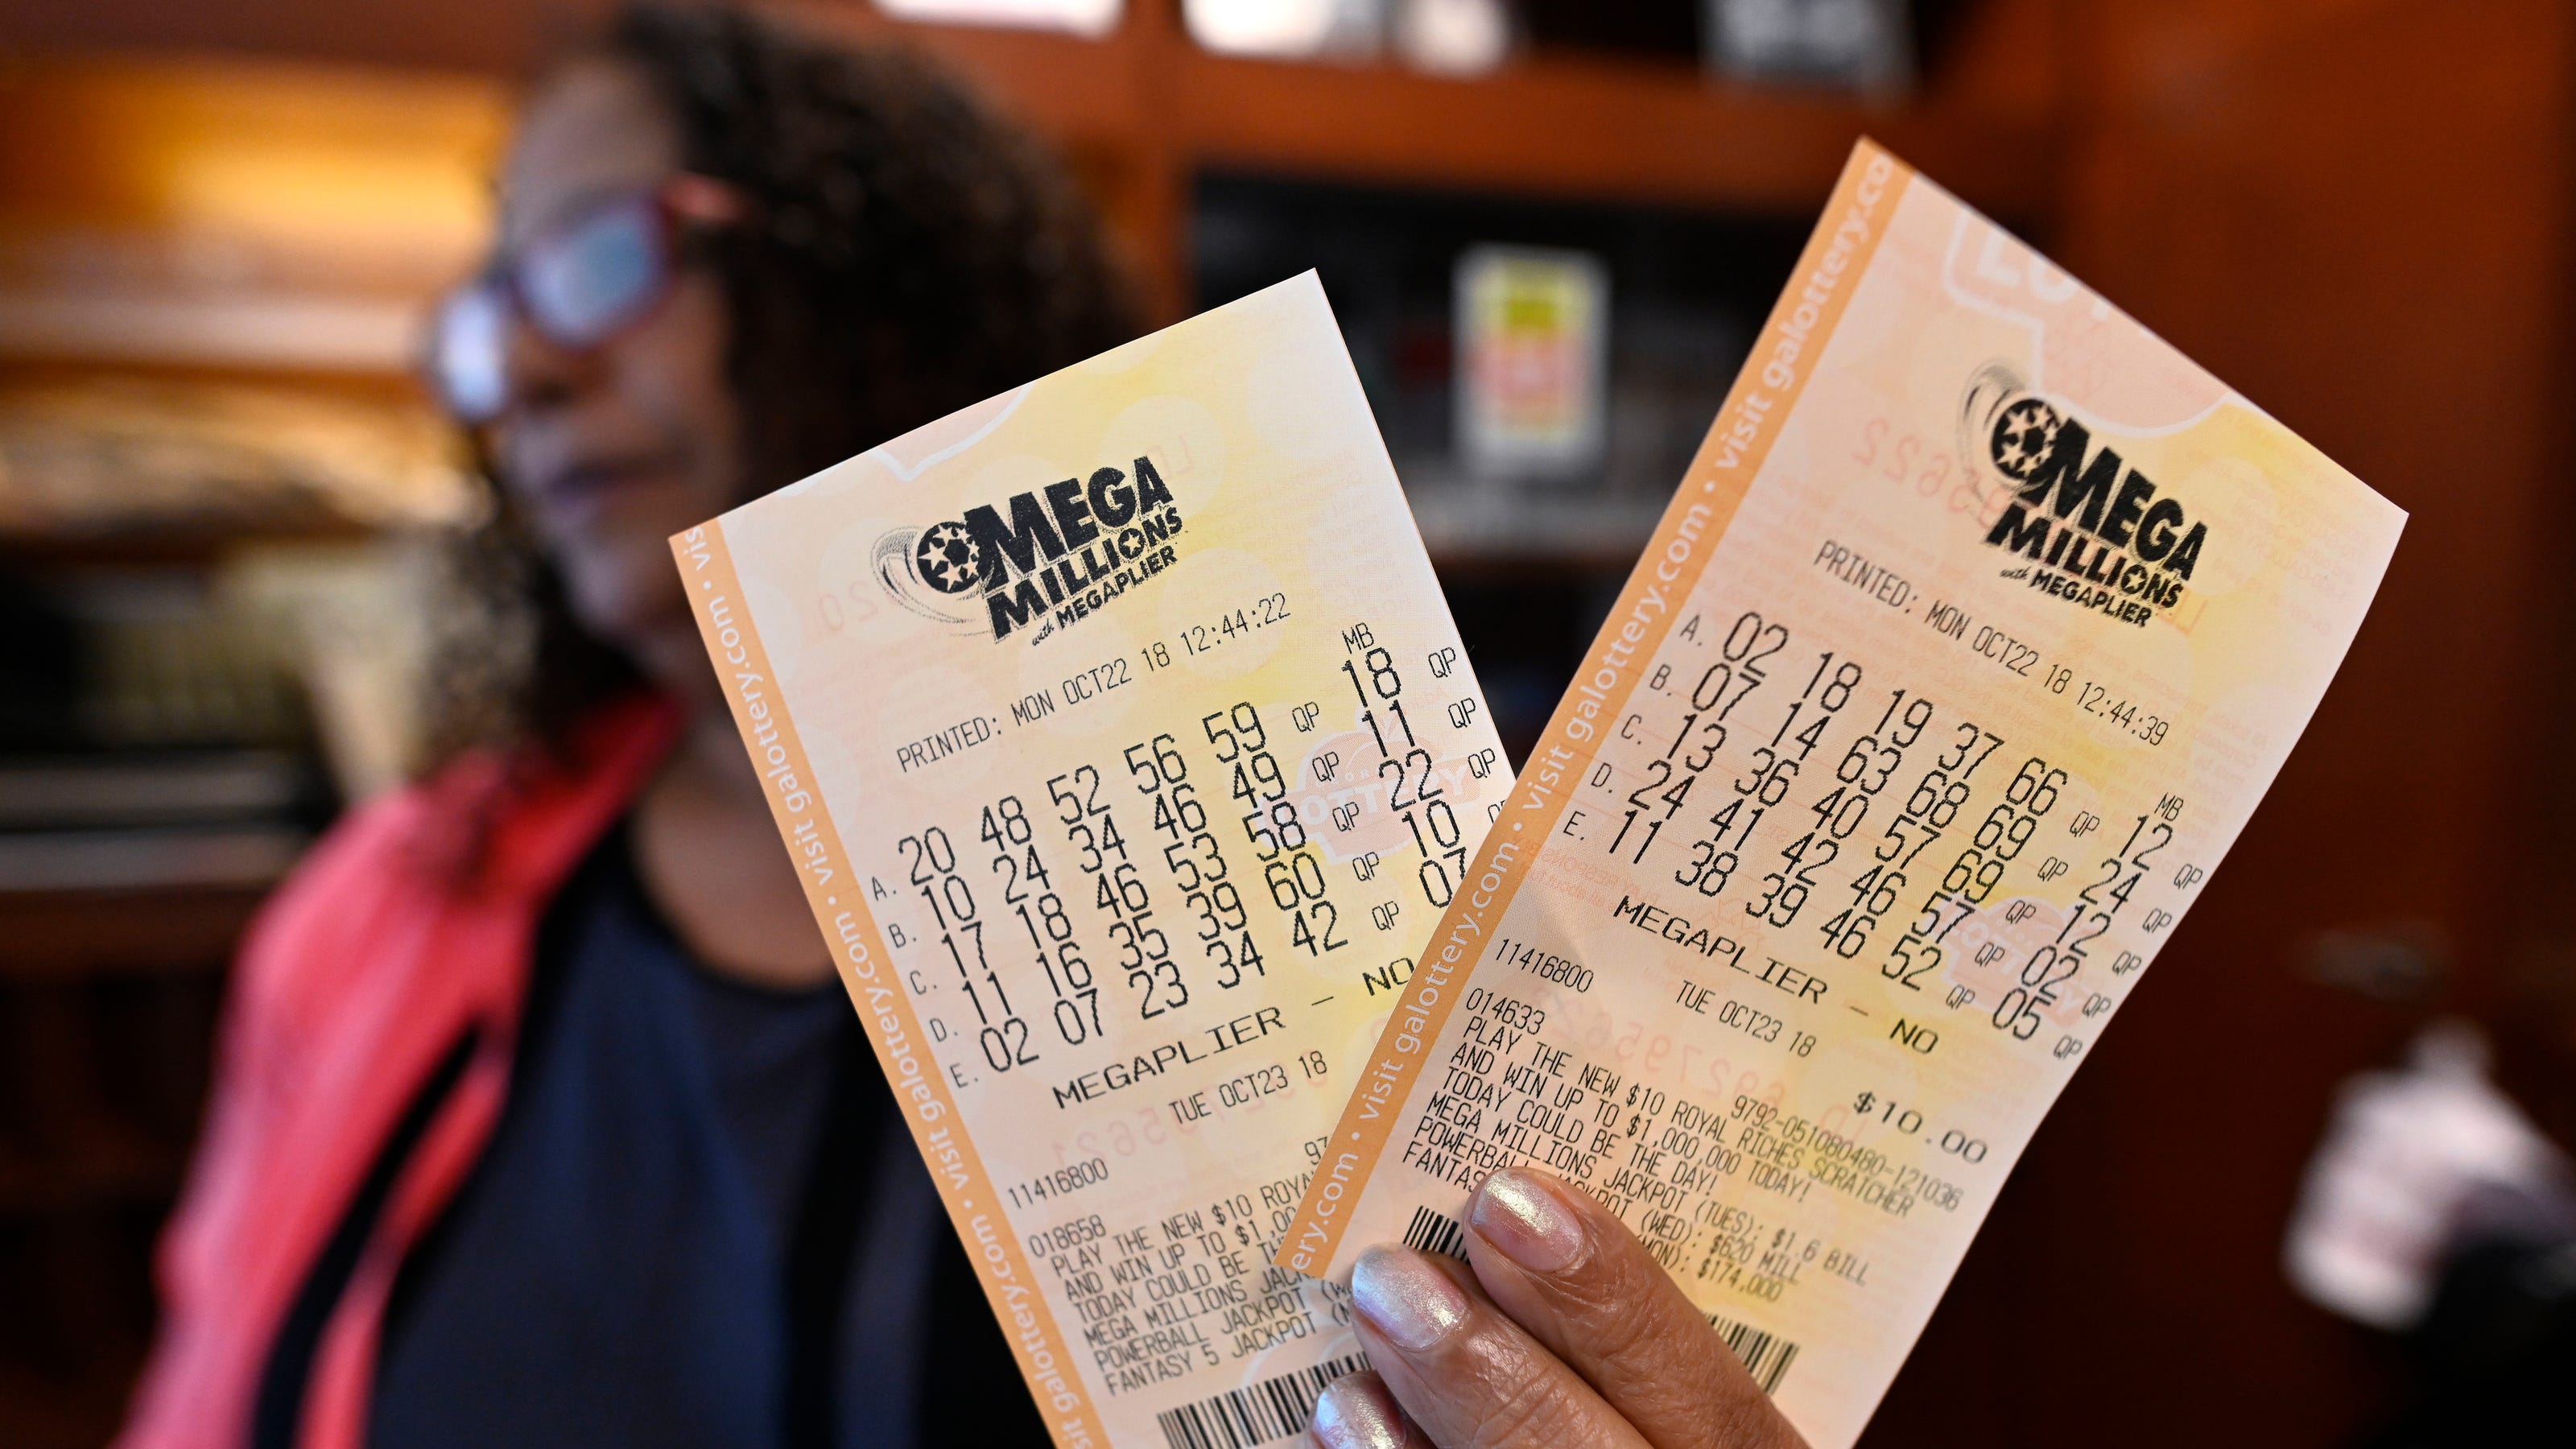 What are the most and least common Mega Millions numbers?